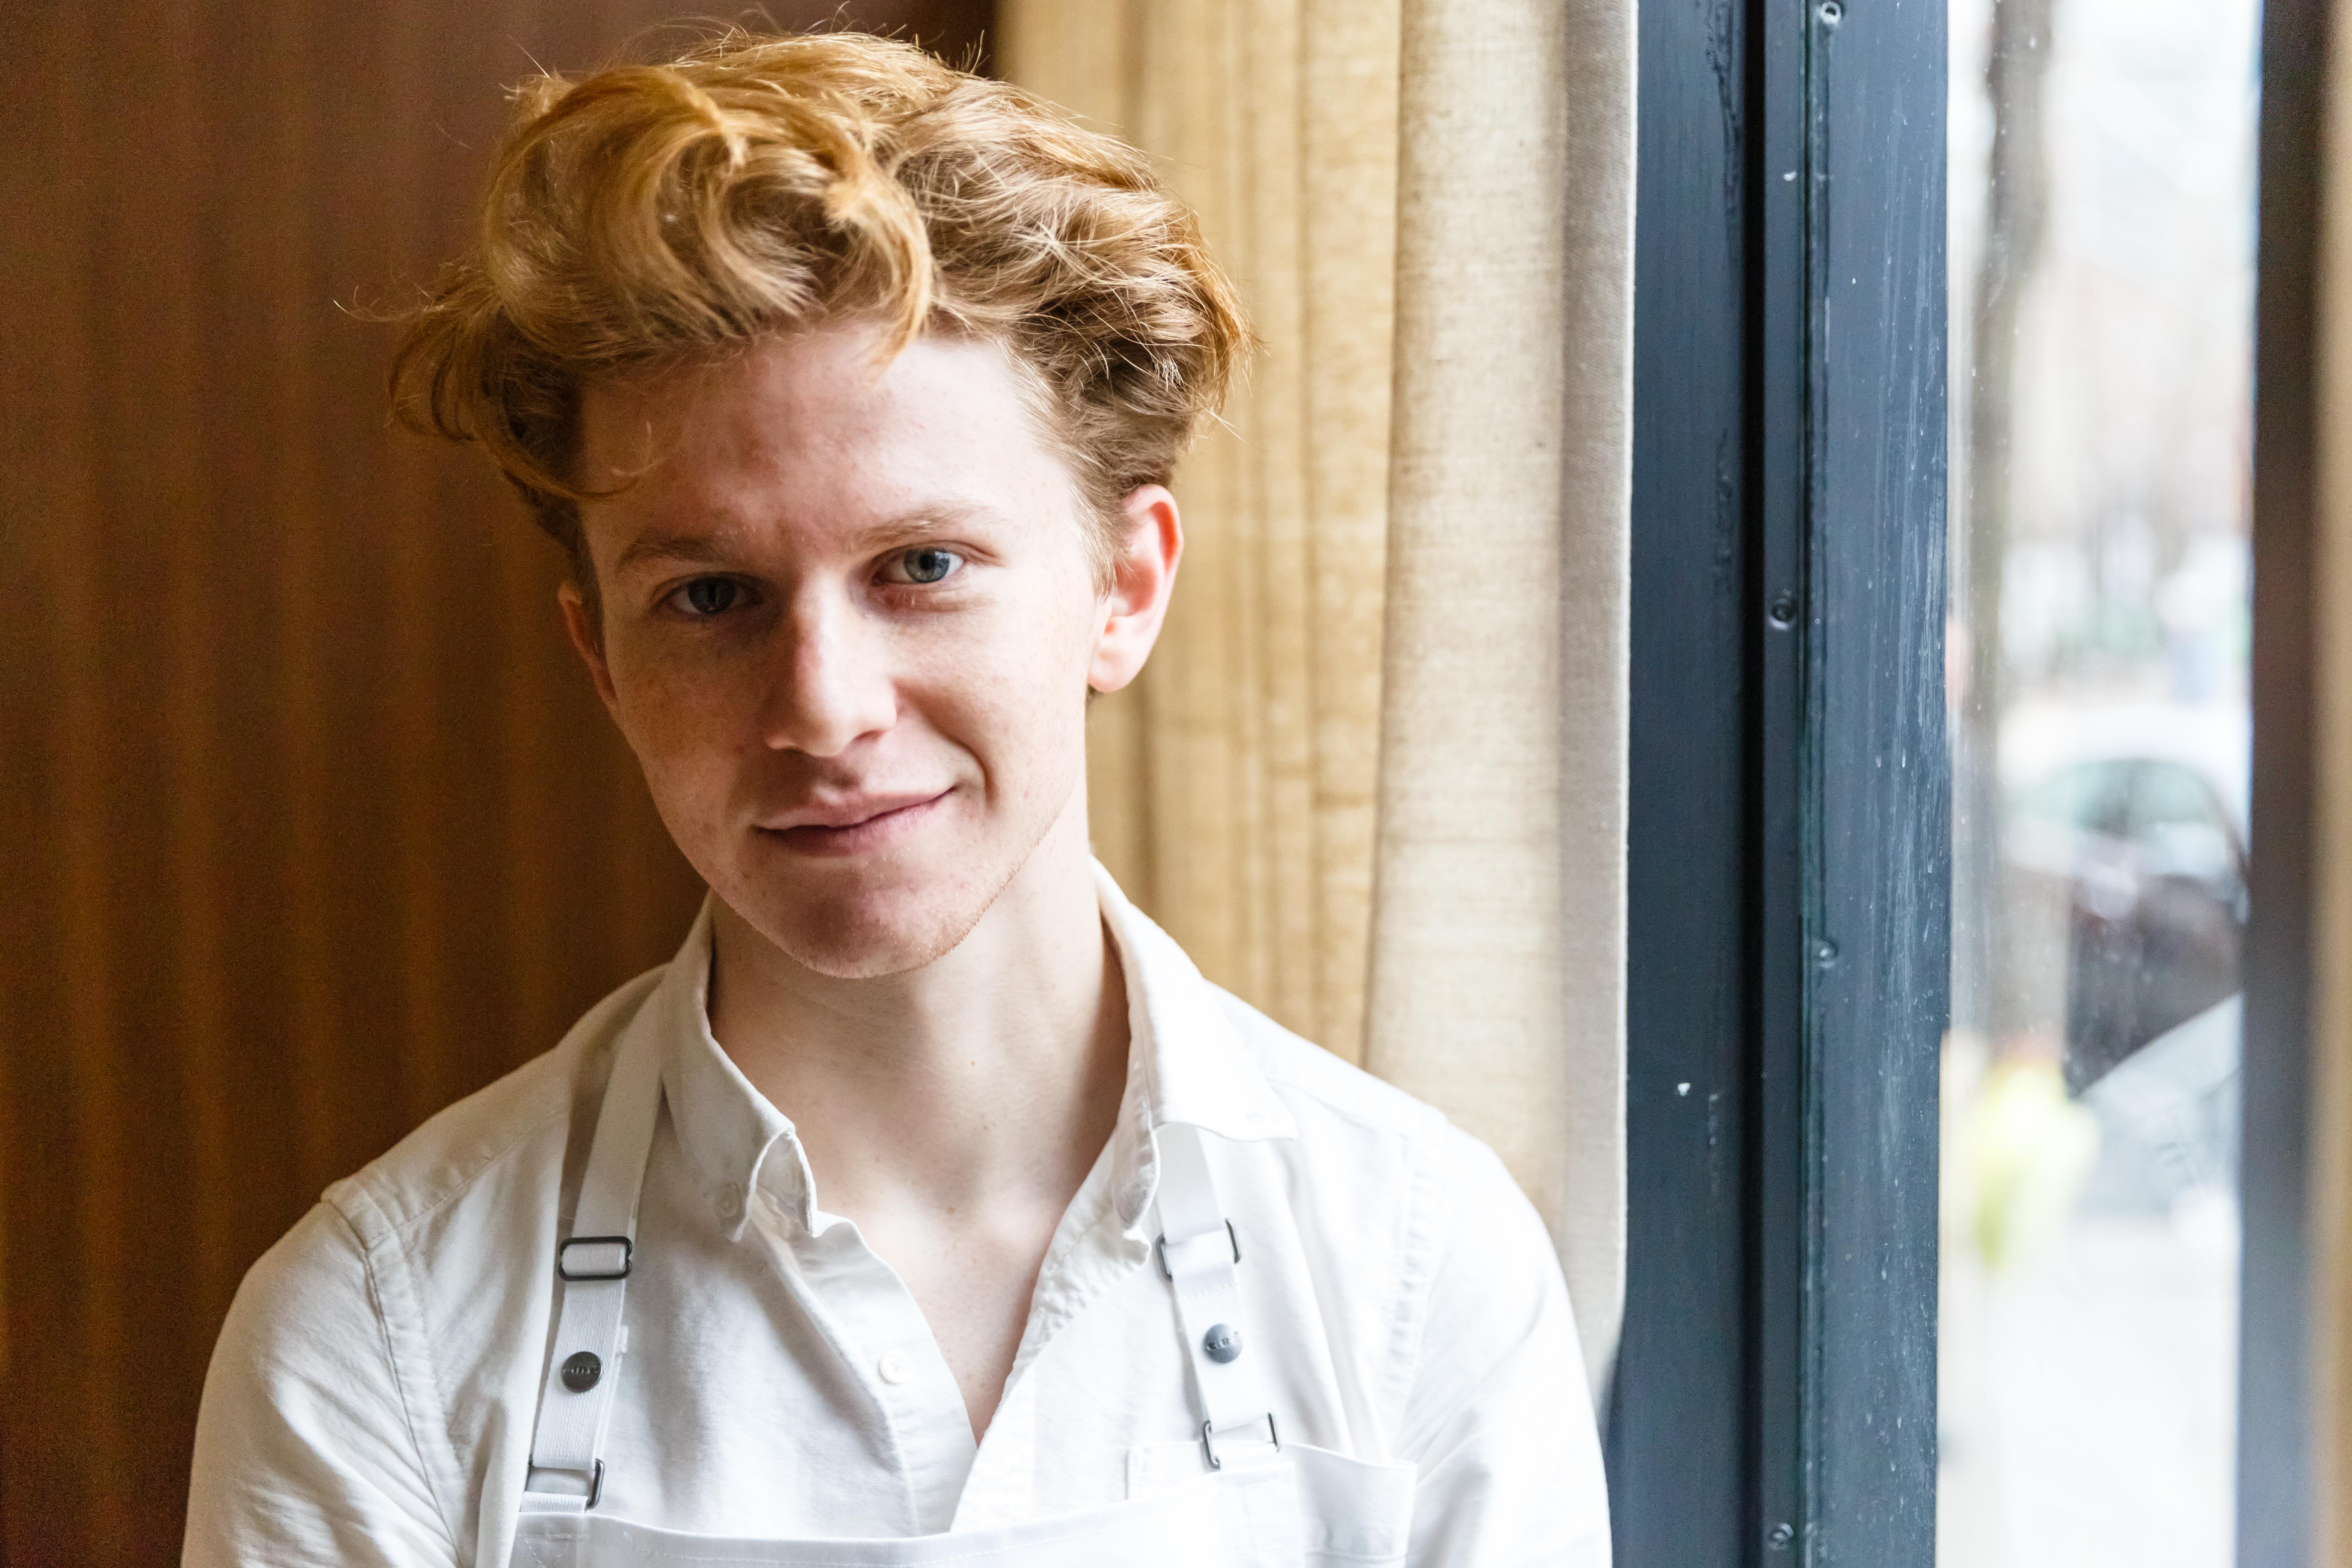 A young person wearing an apron and chef’s whites, Flynn McGarry, stands in the window of a restaurant.